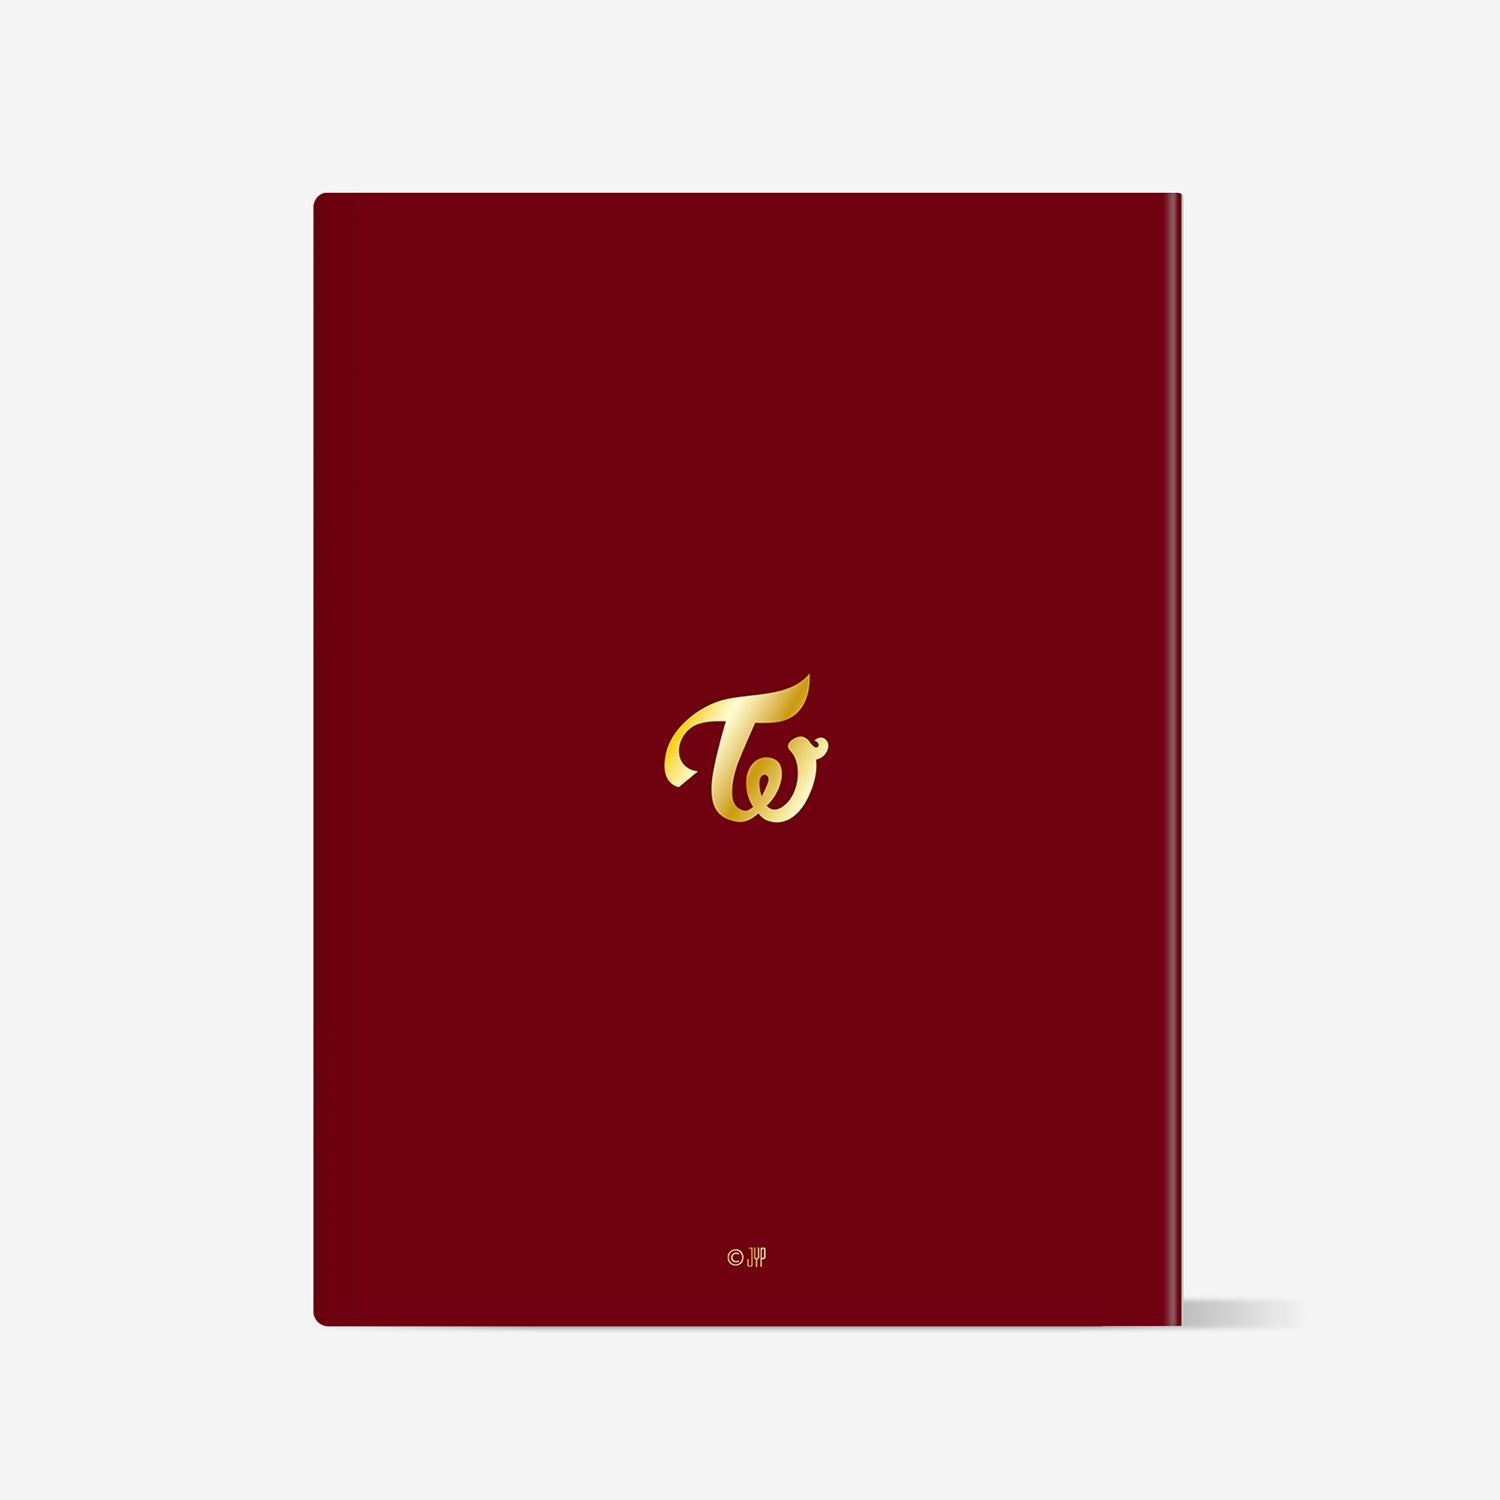 TRADING CARD CASE〈B〉【SPECIAL】/ TWICE『READY TO BE SPECIAL』